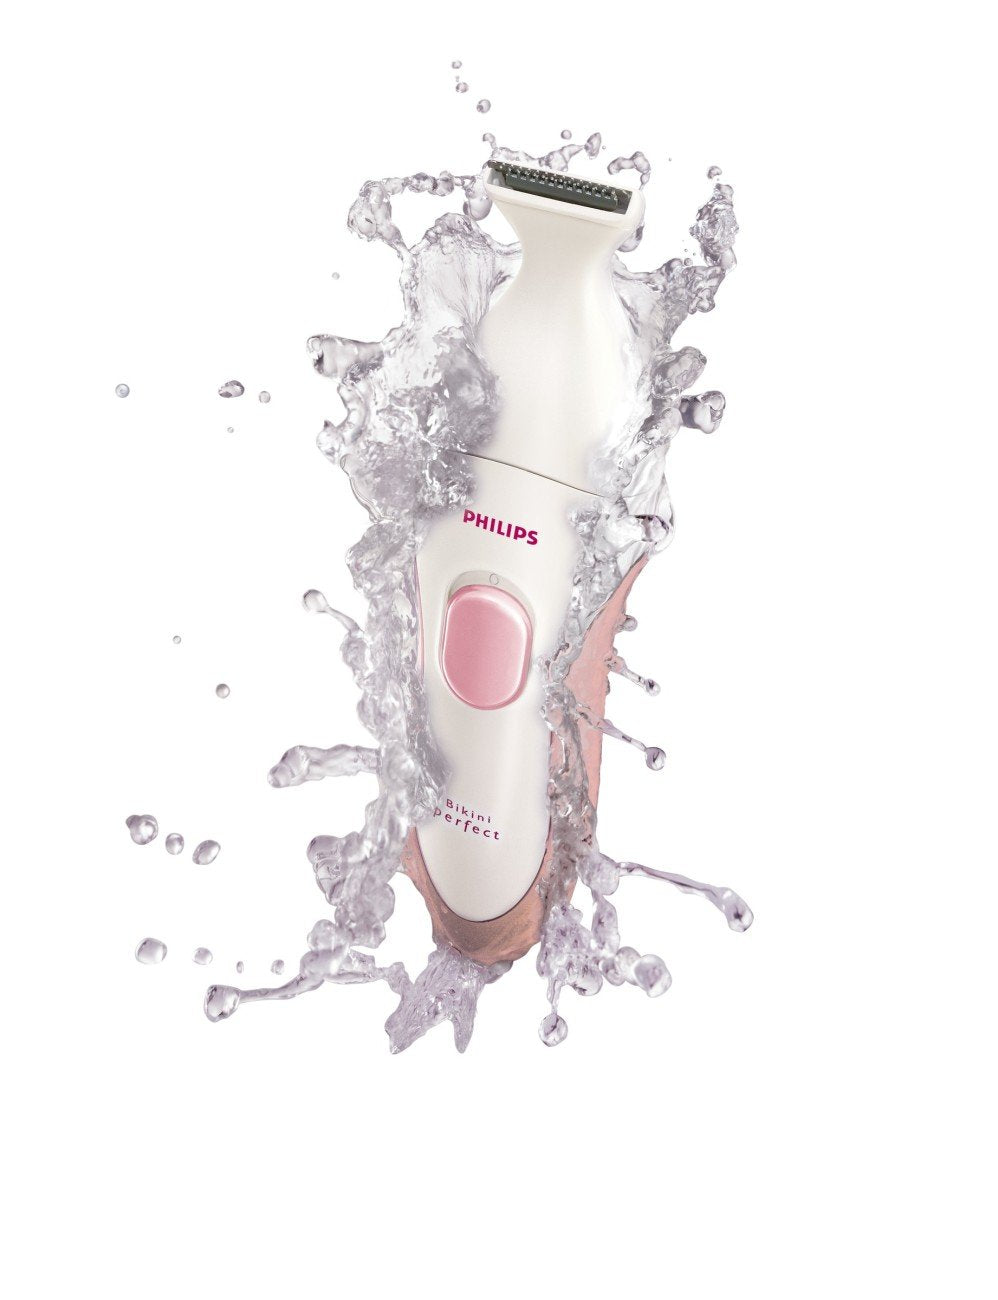 PHILIPS BikiniPerfect Advanced, Wet & Dry Trimmer for Bikini, cordless and rechargable use, 3 attachments HP6376/61